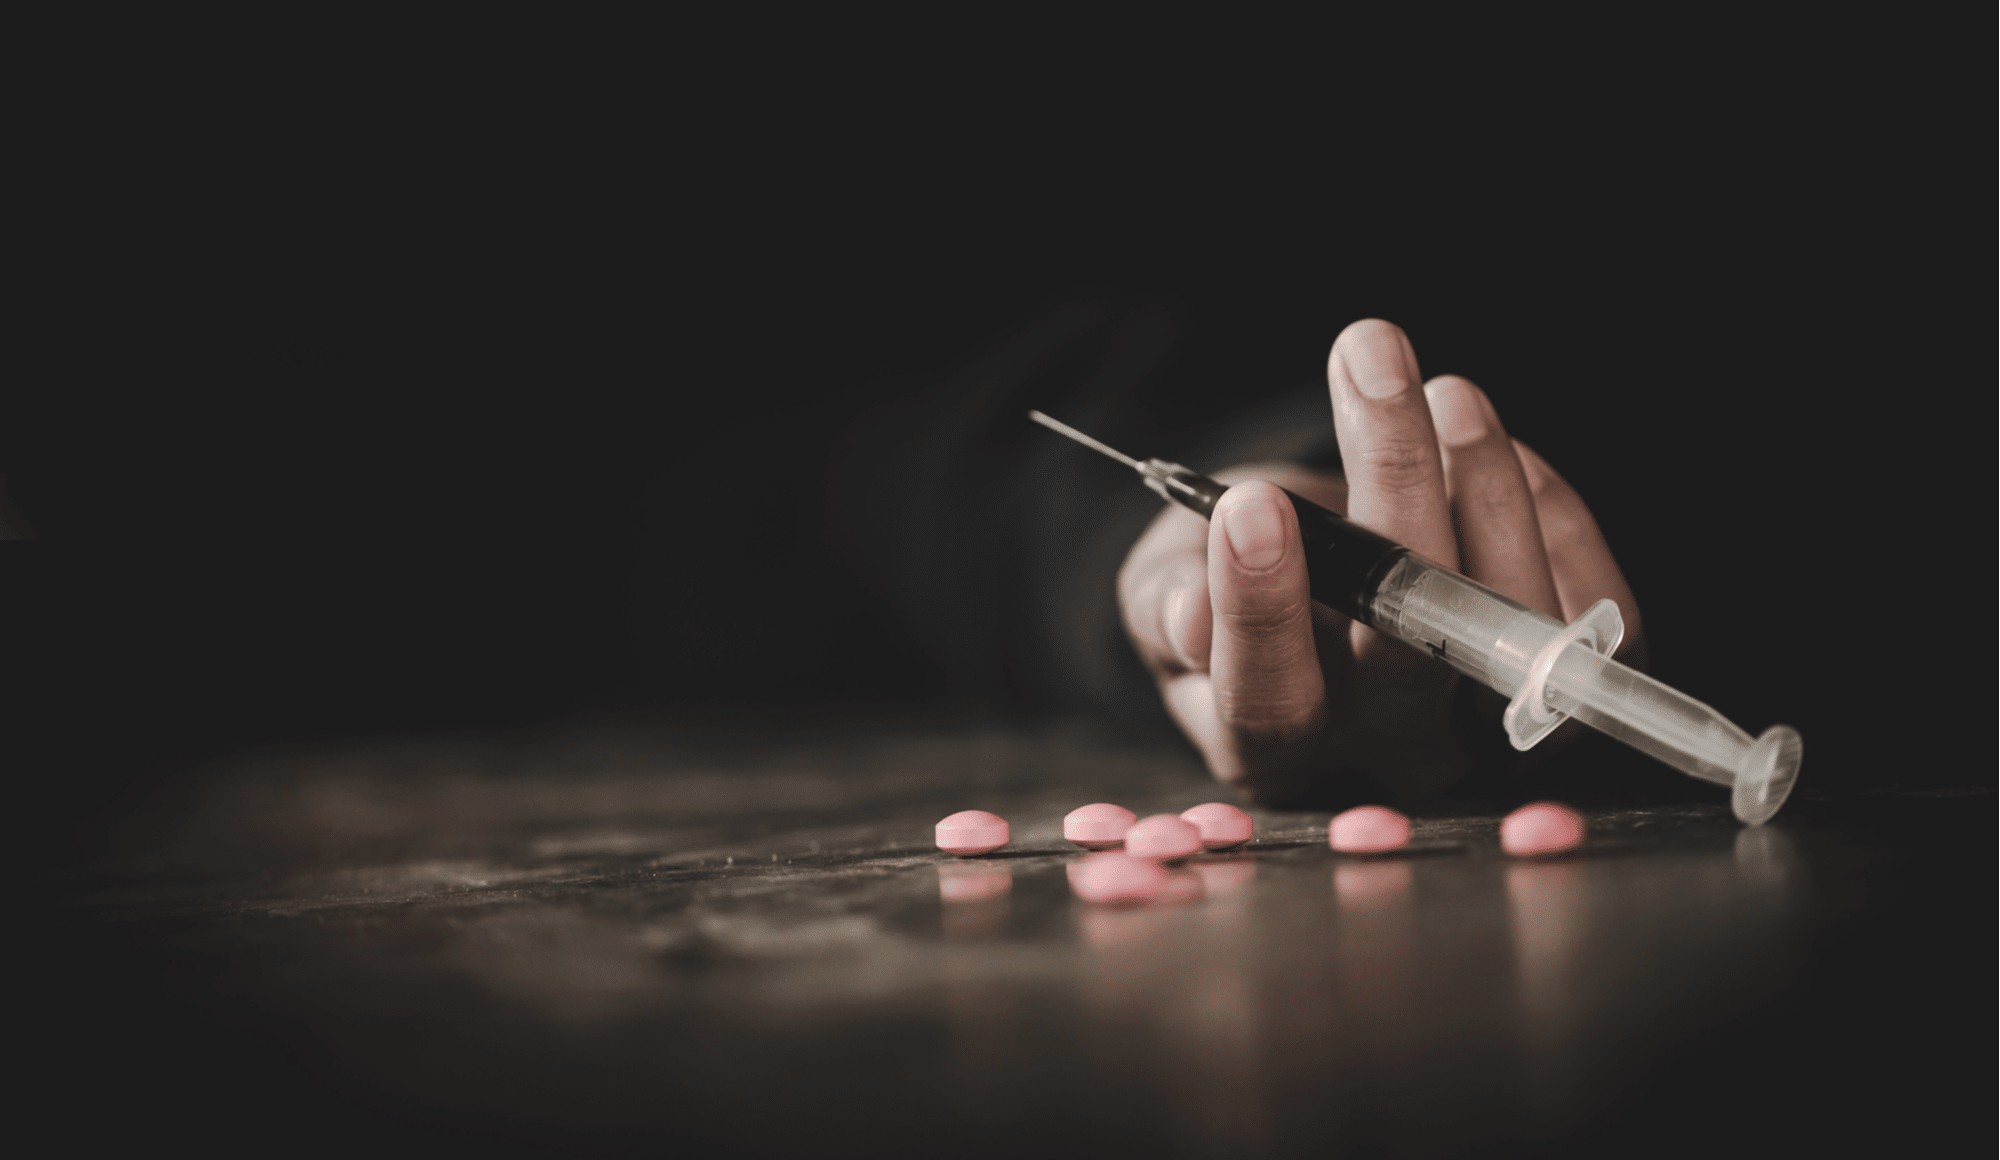 The Cost of Drugs: The Steep Price of Addiction - Pathfinders - An image of a man laying on the ground surrounded by pills and holding a needle, as he thinks about the cost of drugs in various aspects.